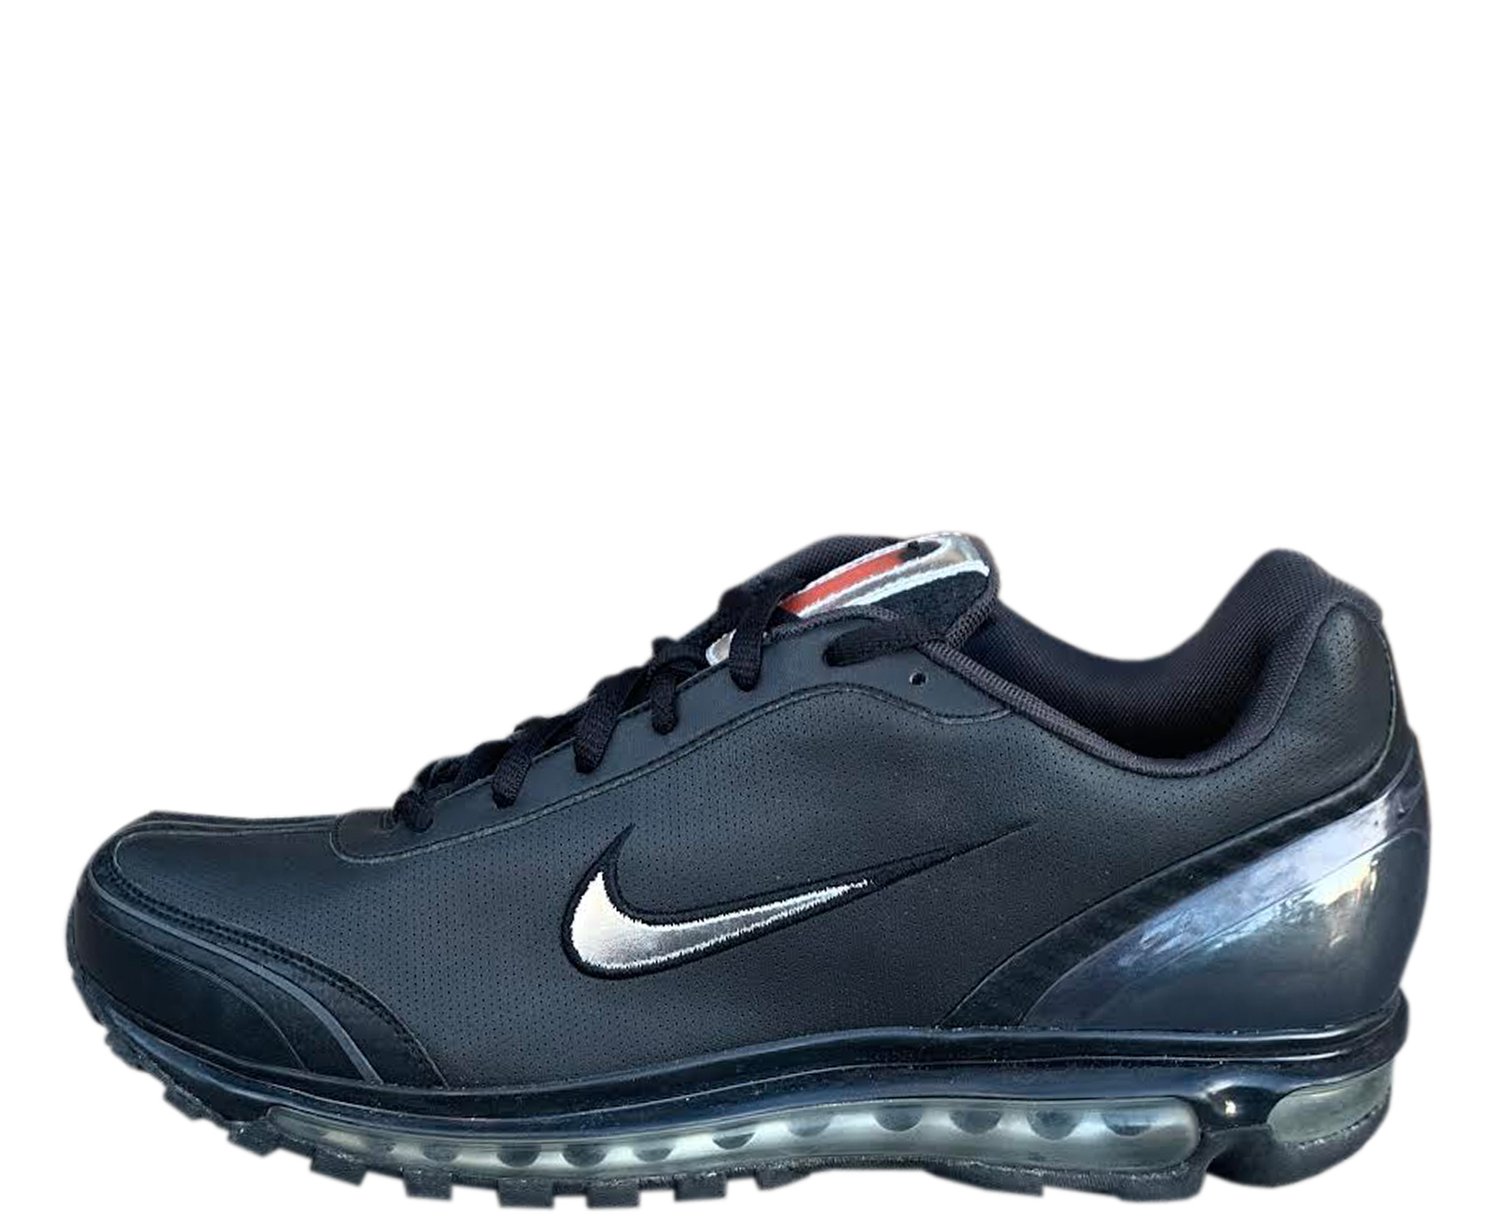 borst composiet Woning Nike Air Max 2004 Black / Red / Metallic Silver / Carbon Fiber (Size 9)  "Sample Unreleased" — Roots